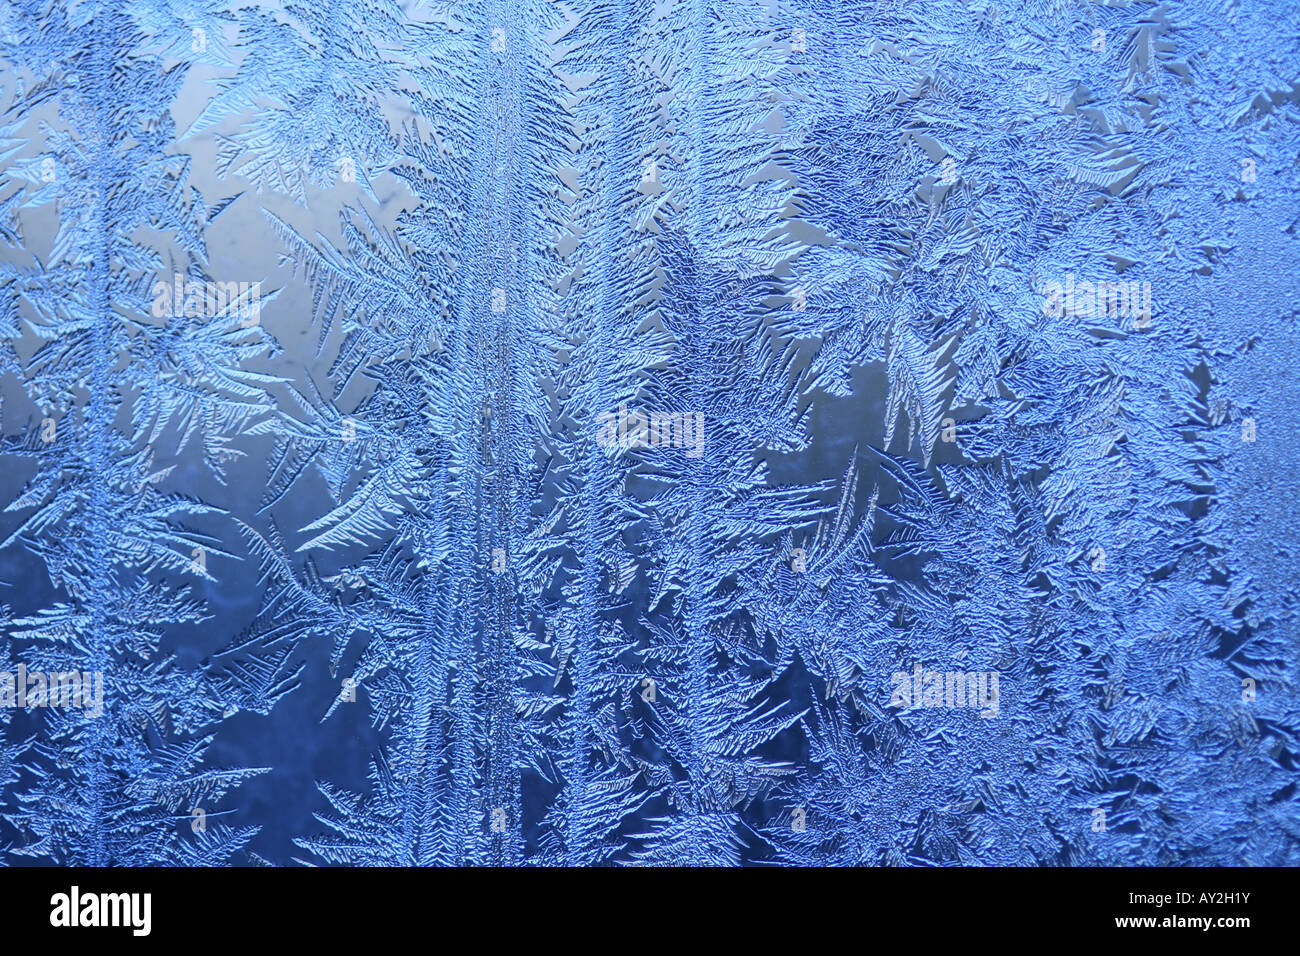 Ice crystals on a window (winter background). Stock Photo